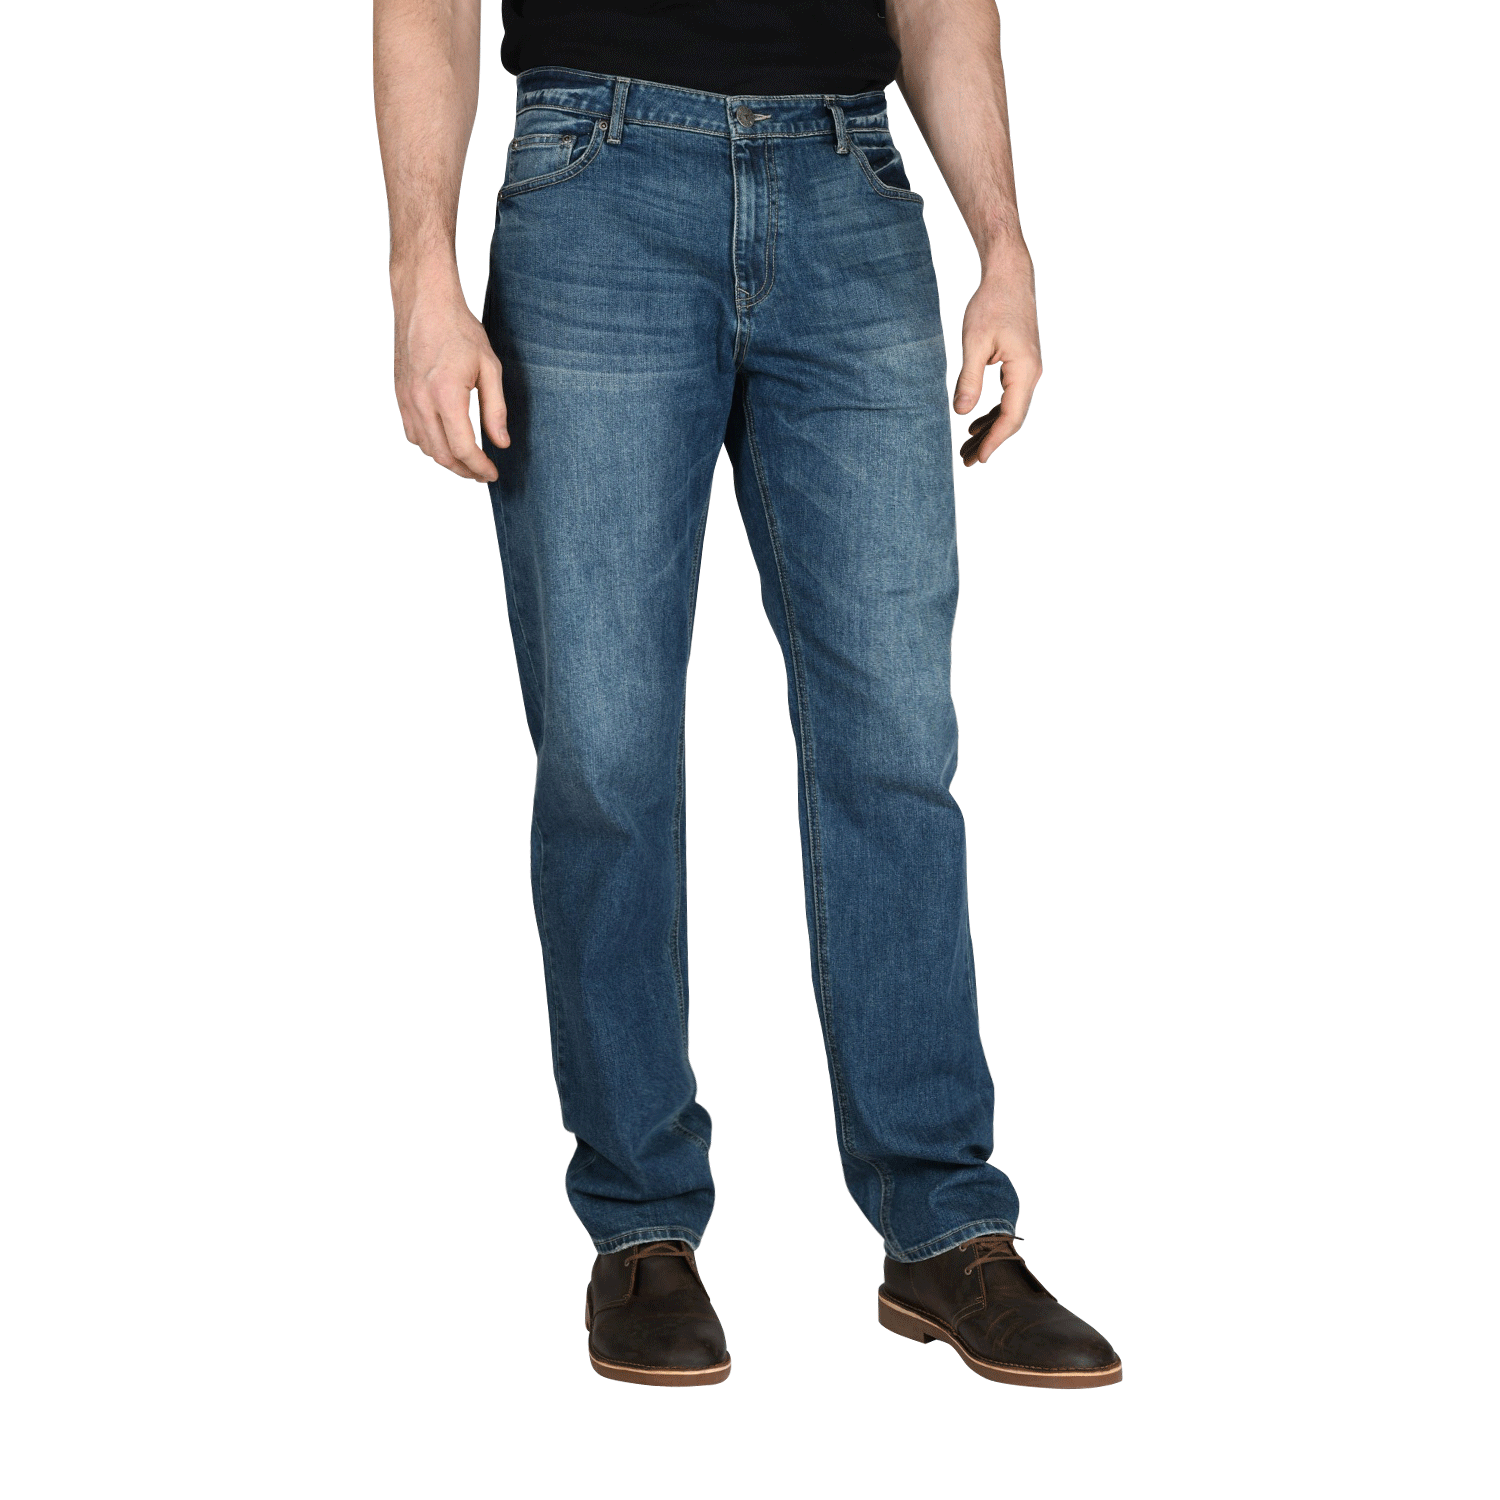 Mason SEMI-RELAXED Men's Tall Jeans in Signature Fade